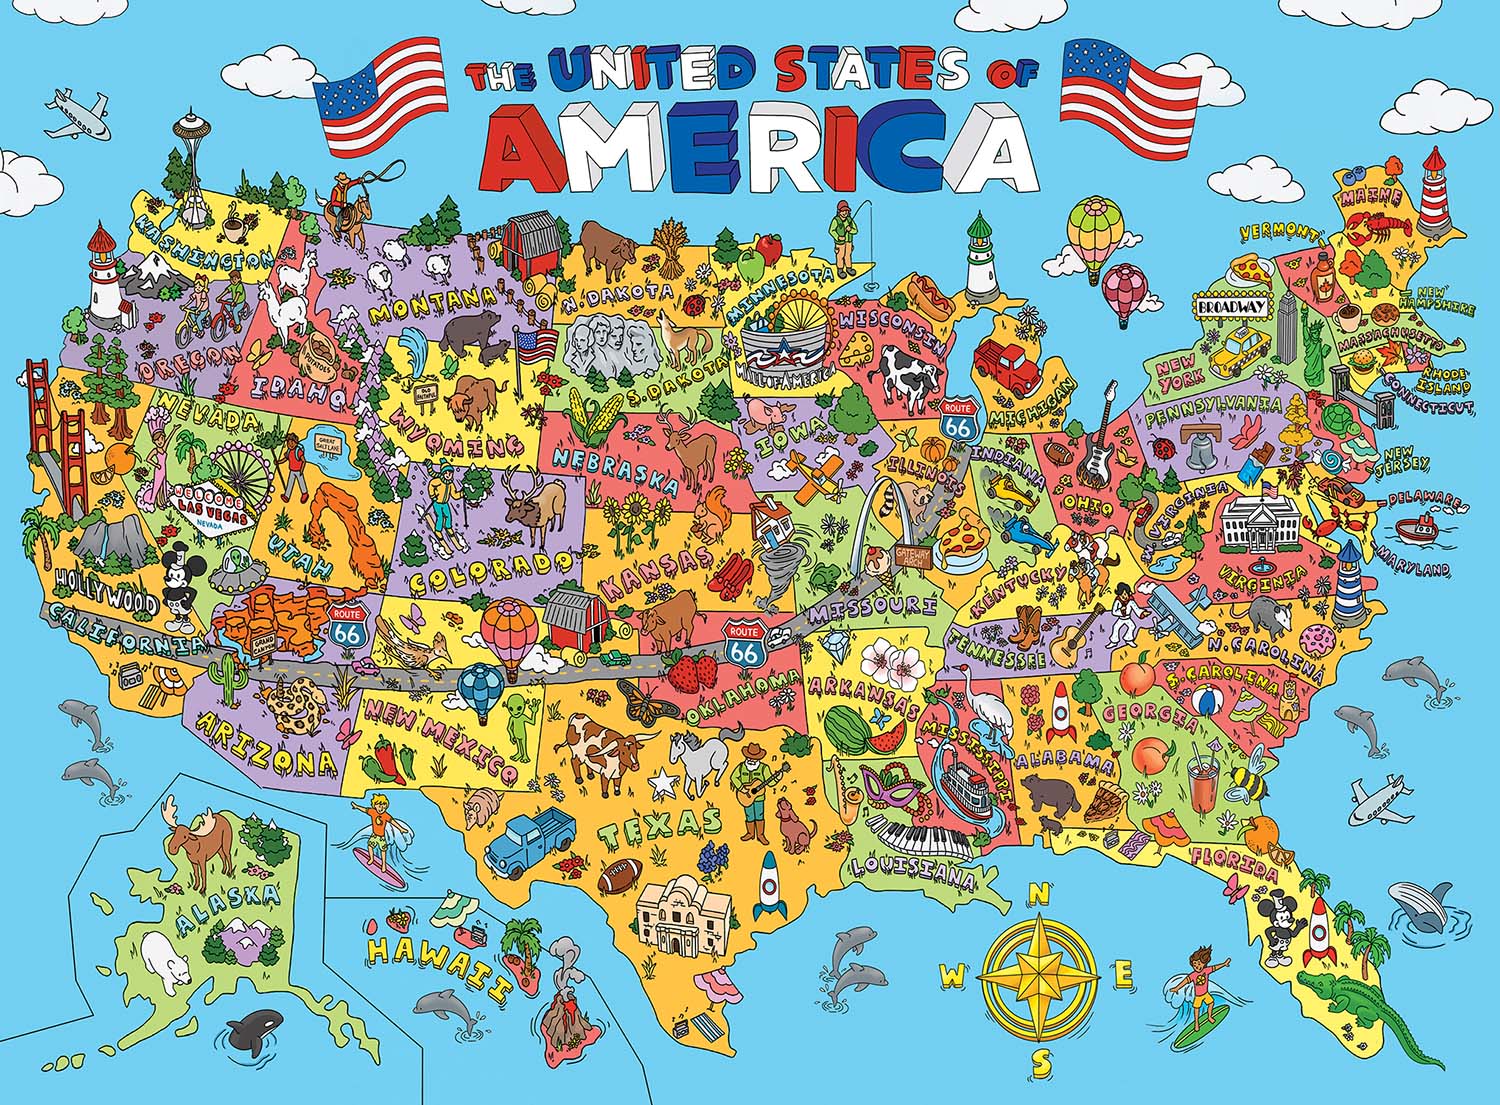 101 Things to Spot - In the USA 100 Piece Puzzle Educational Jigsaw Puzzle